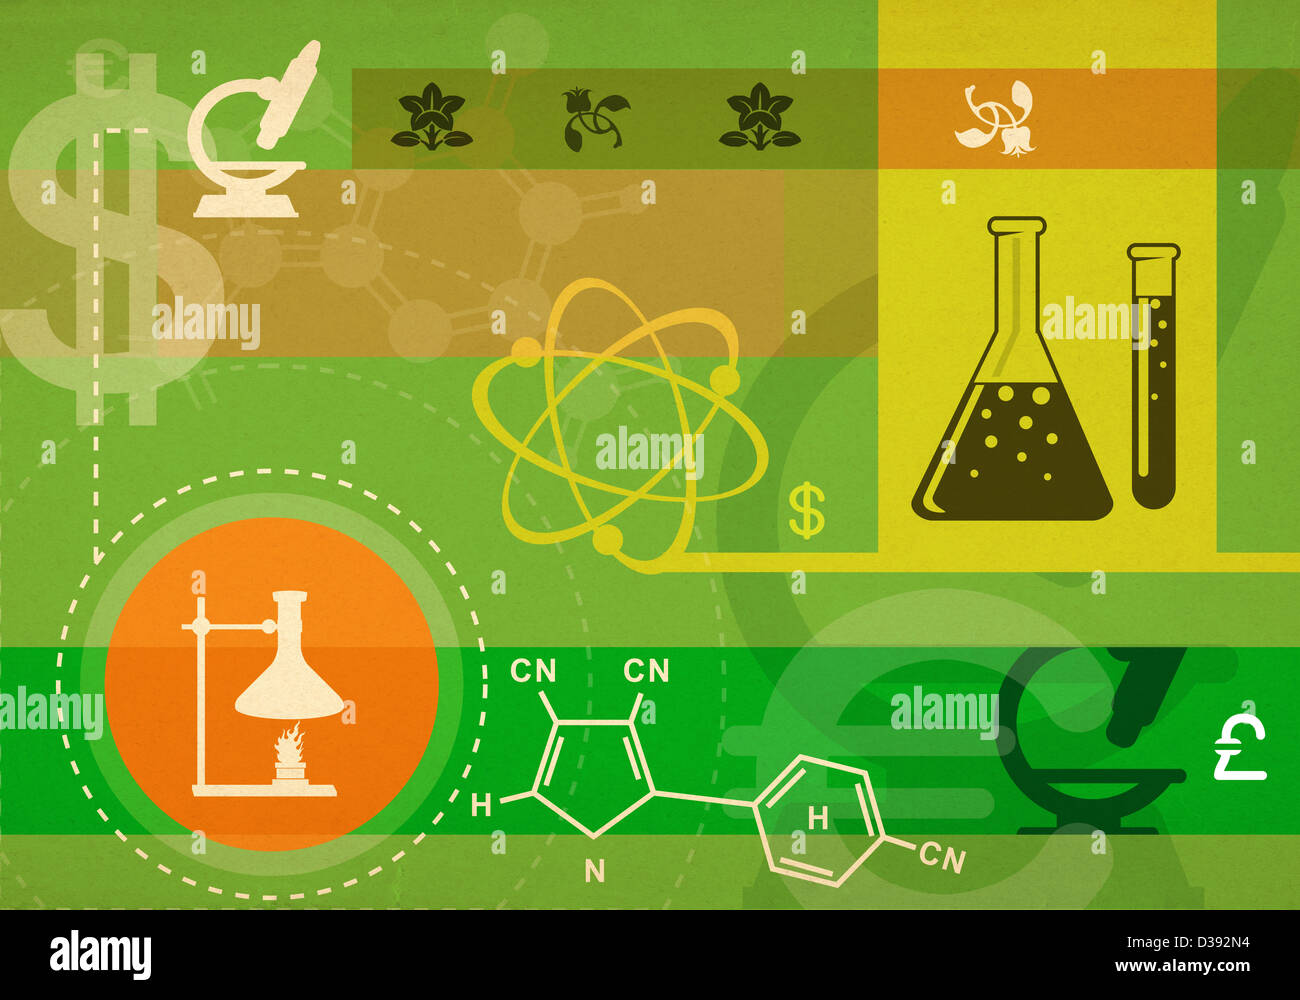 Montage of currency symbols and science objects Stock Photo